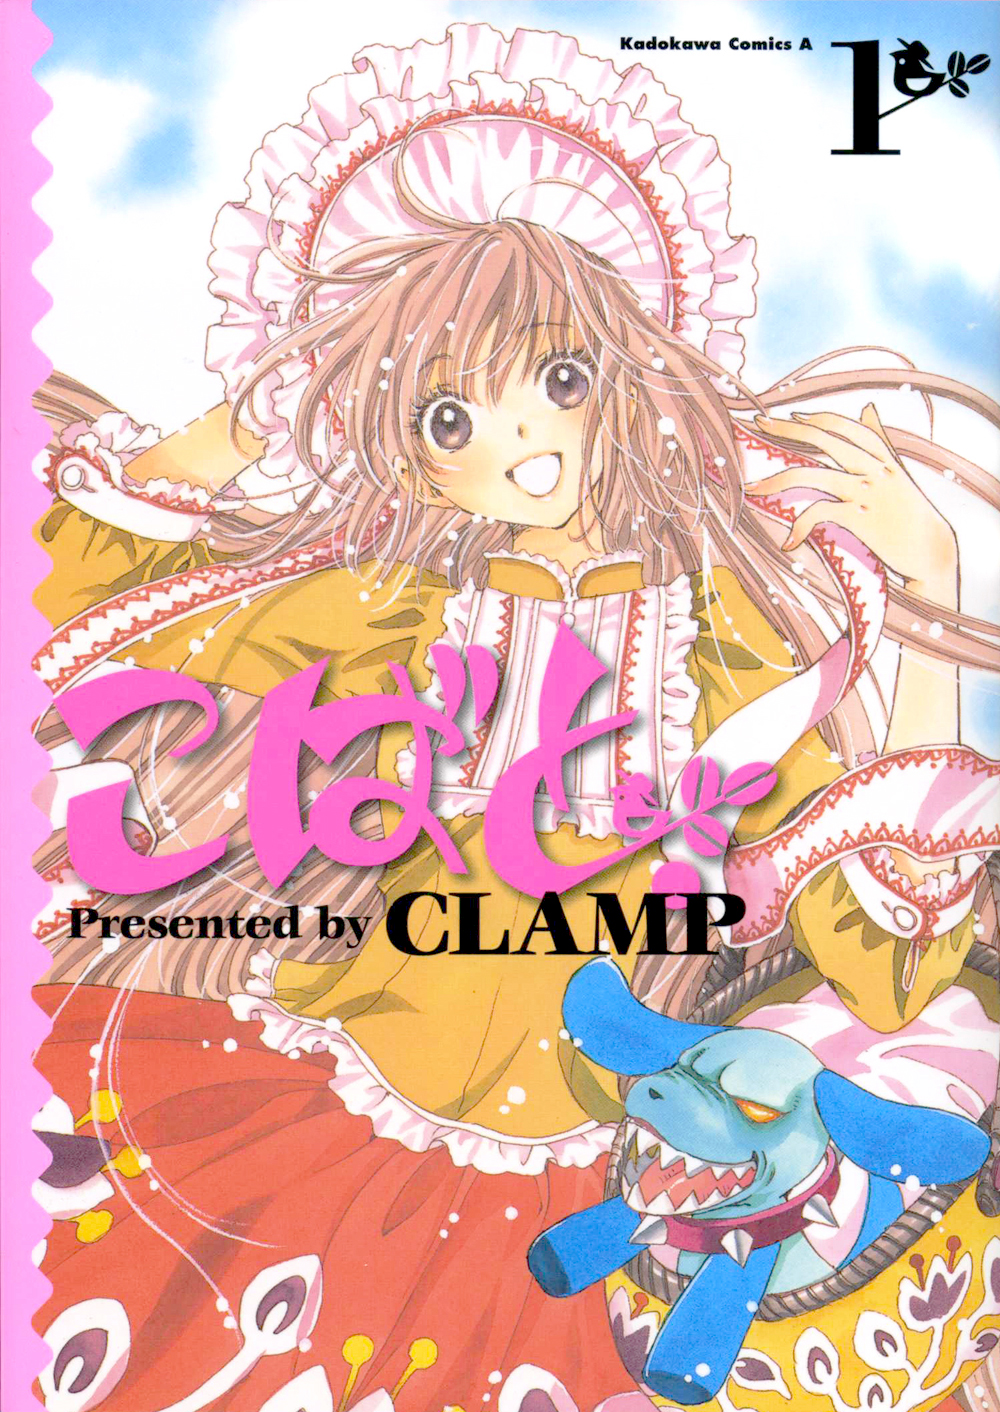 What makes CLAMP's manga special? - Quora